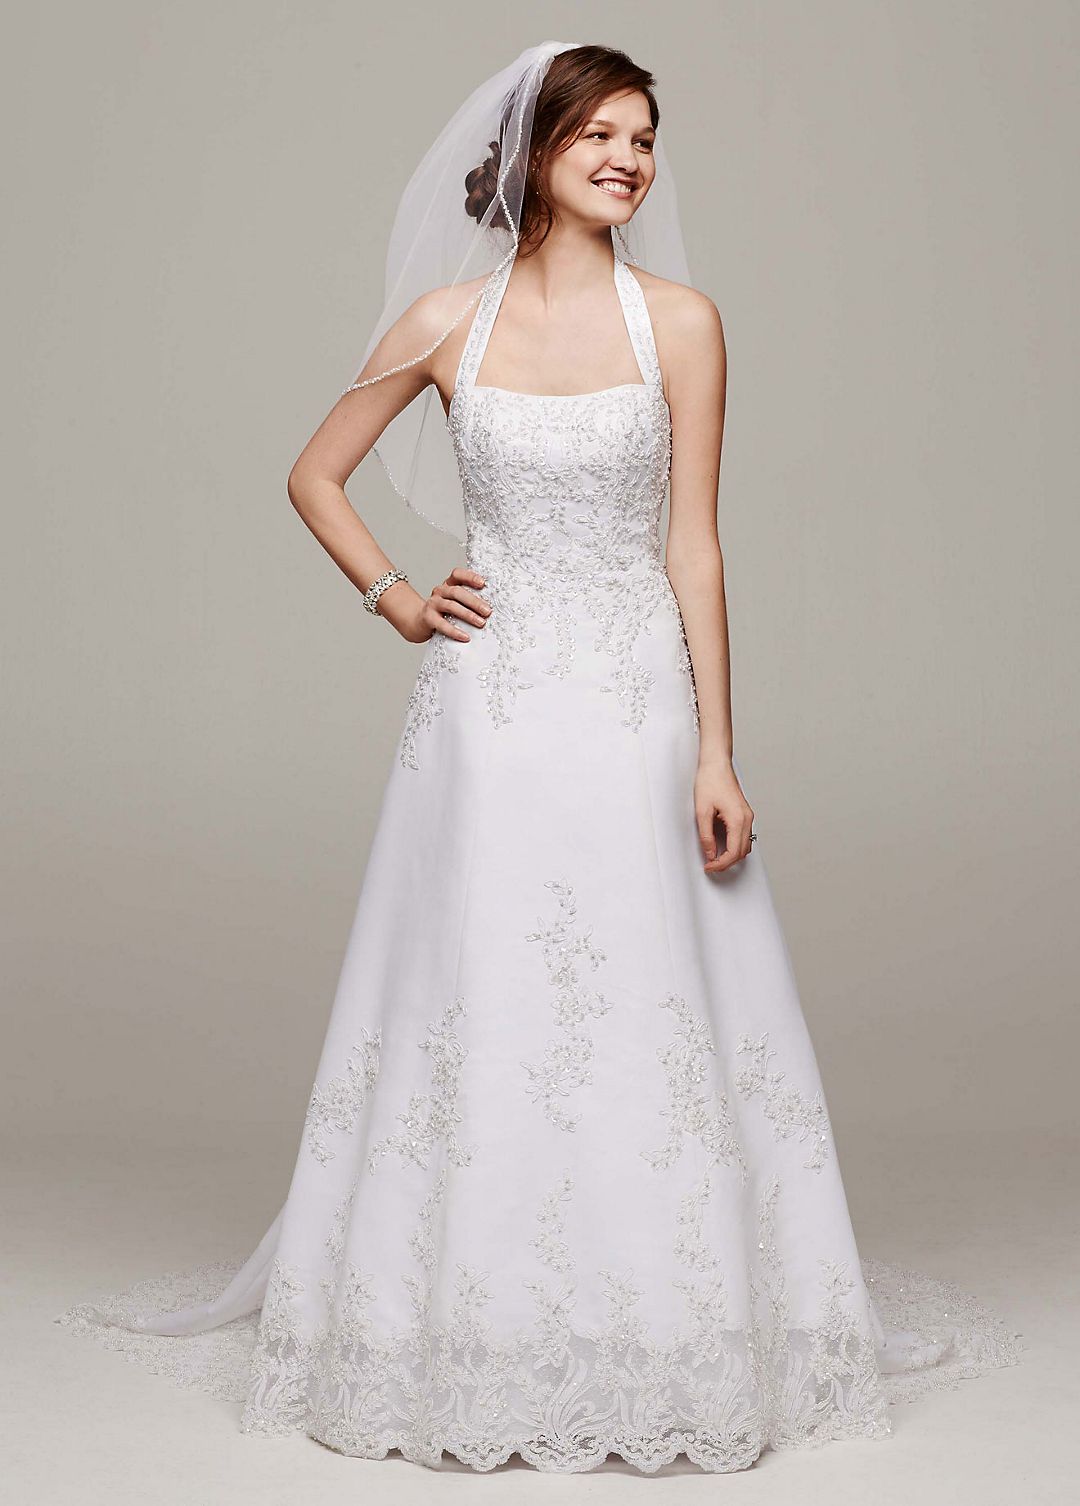 Satin Halter A-line Wedding Dress with Beaded Lace Image 3